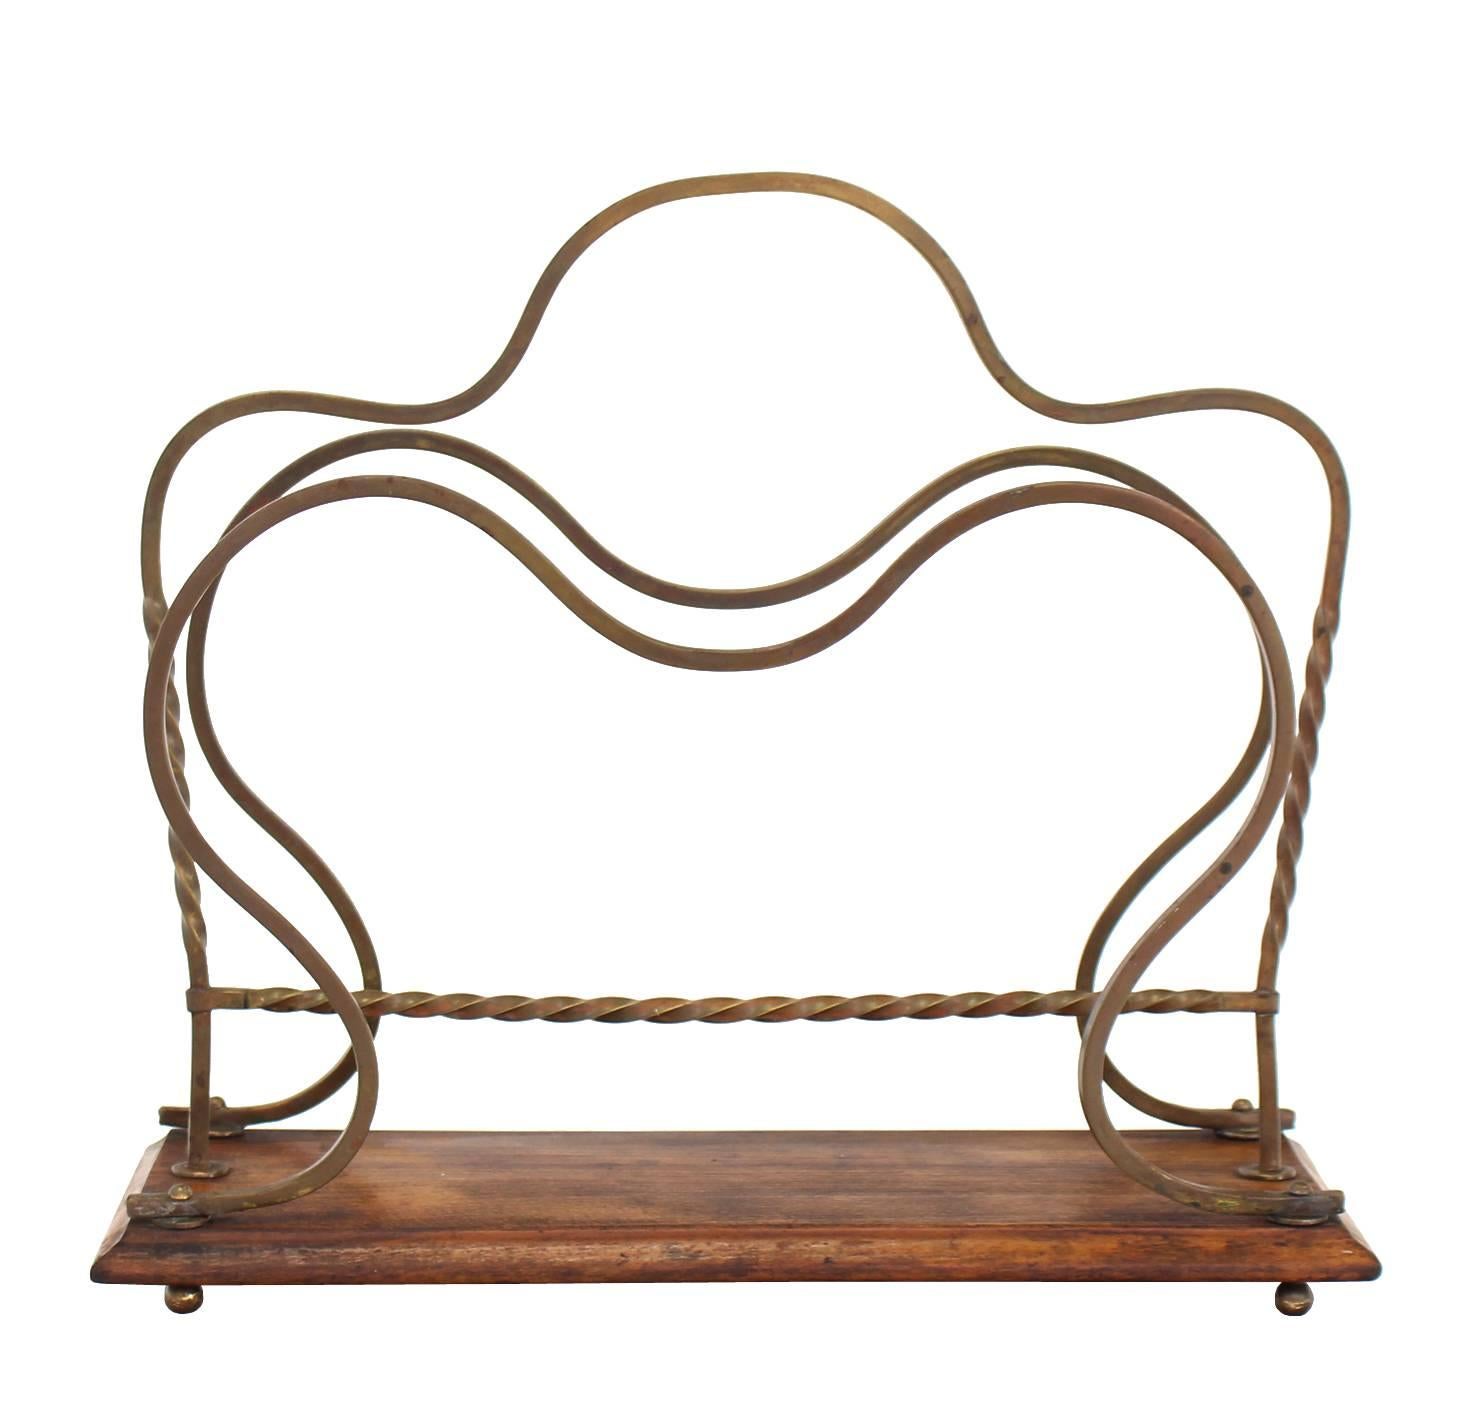 20th Century Arts and Crafts Twisted Brass and Wood Magazine Rack For Sale